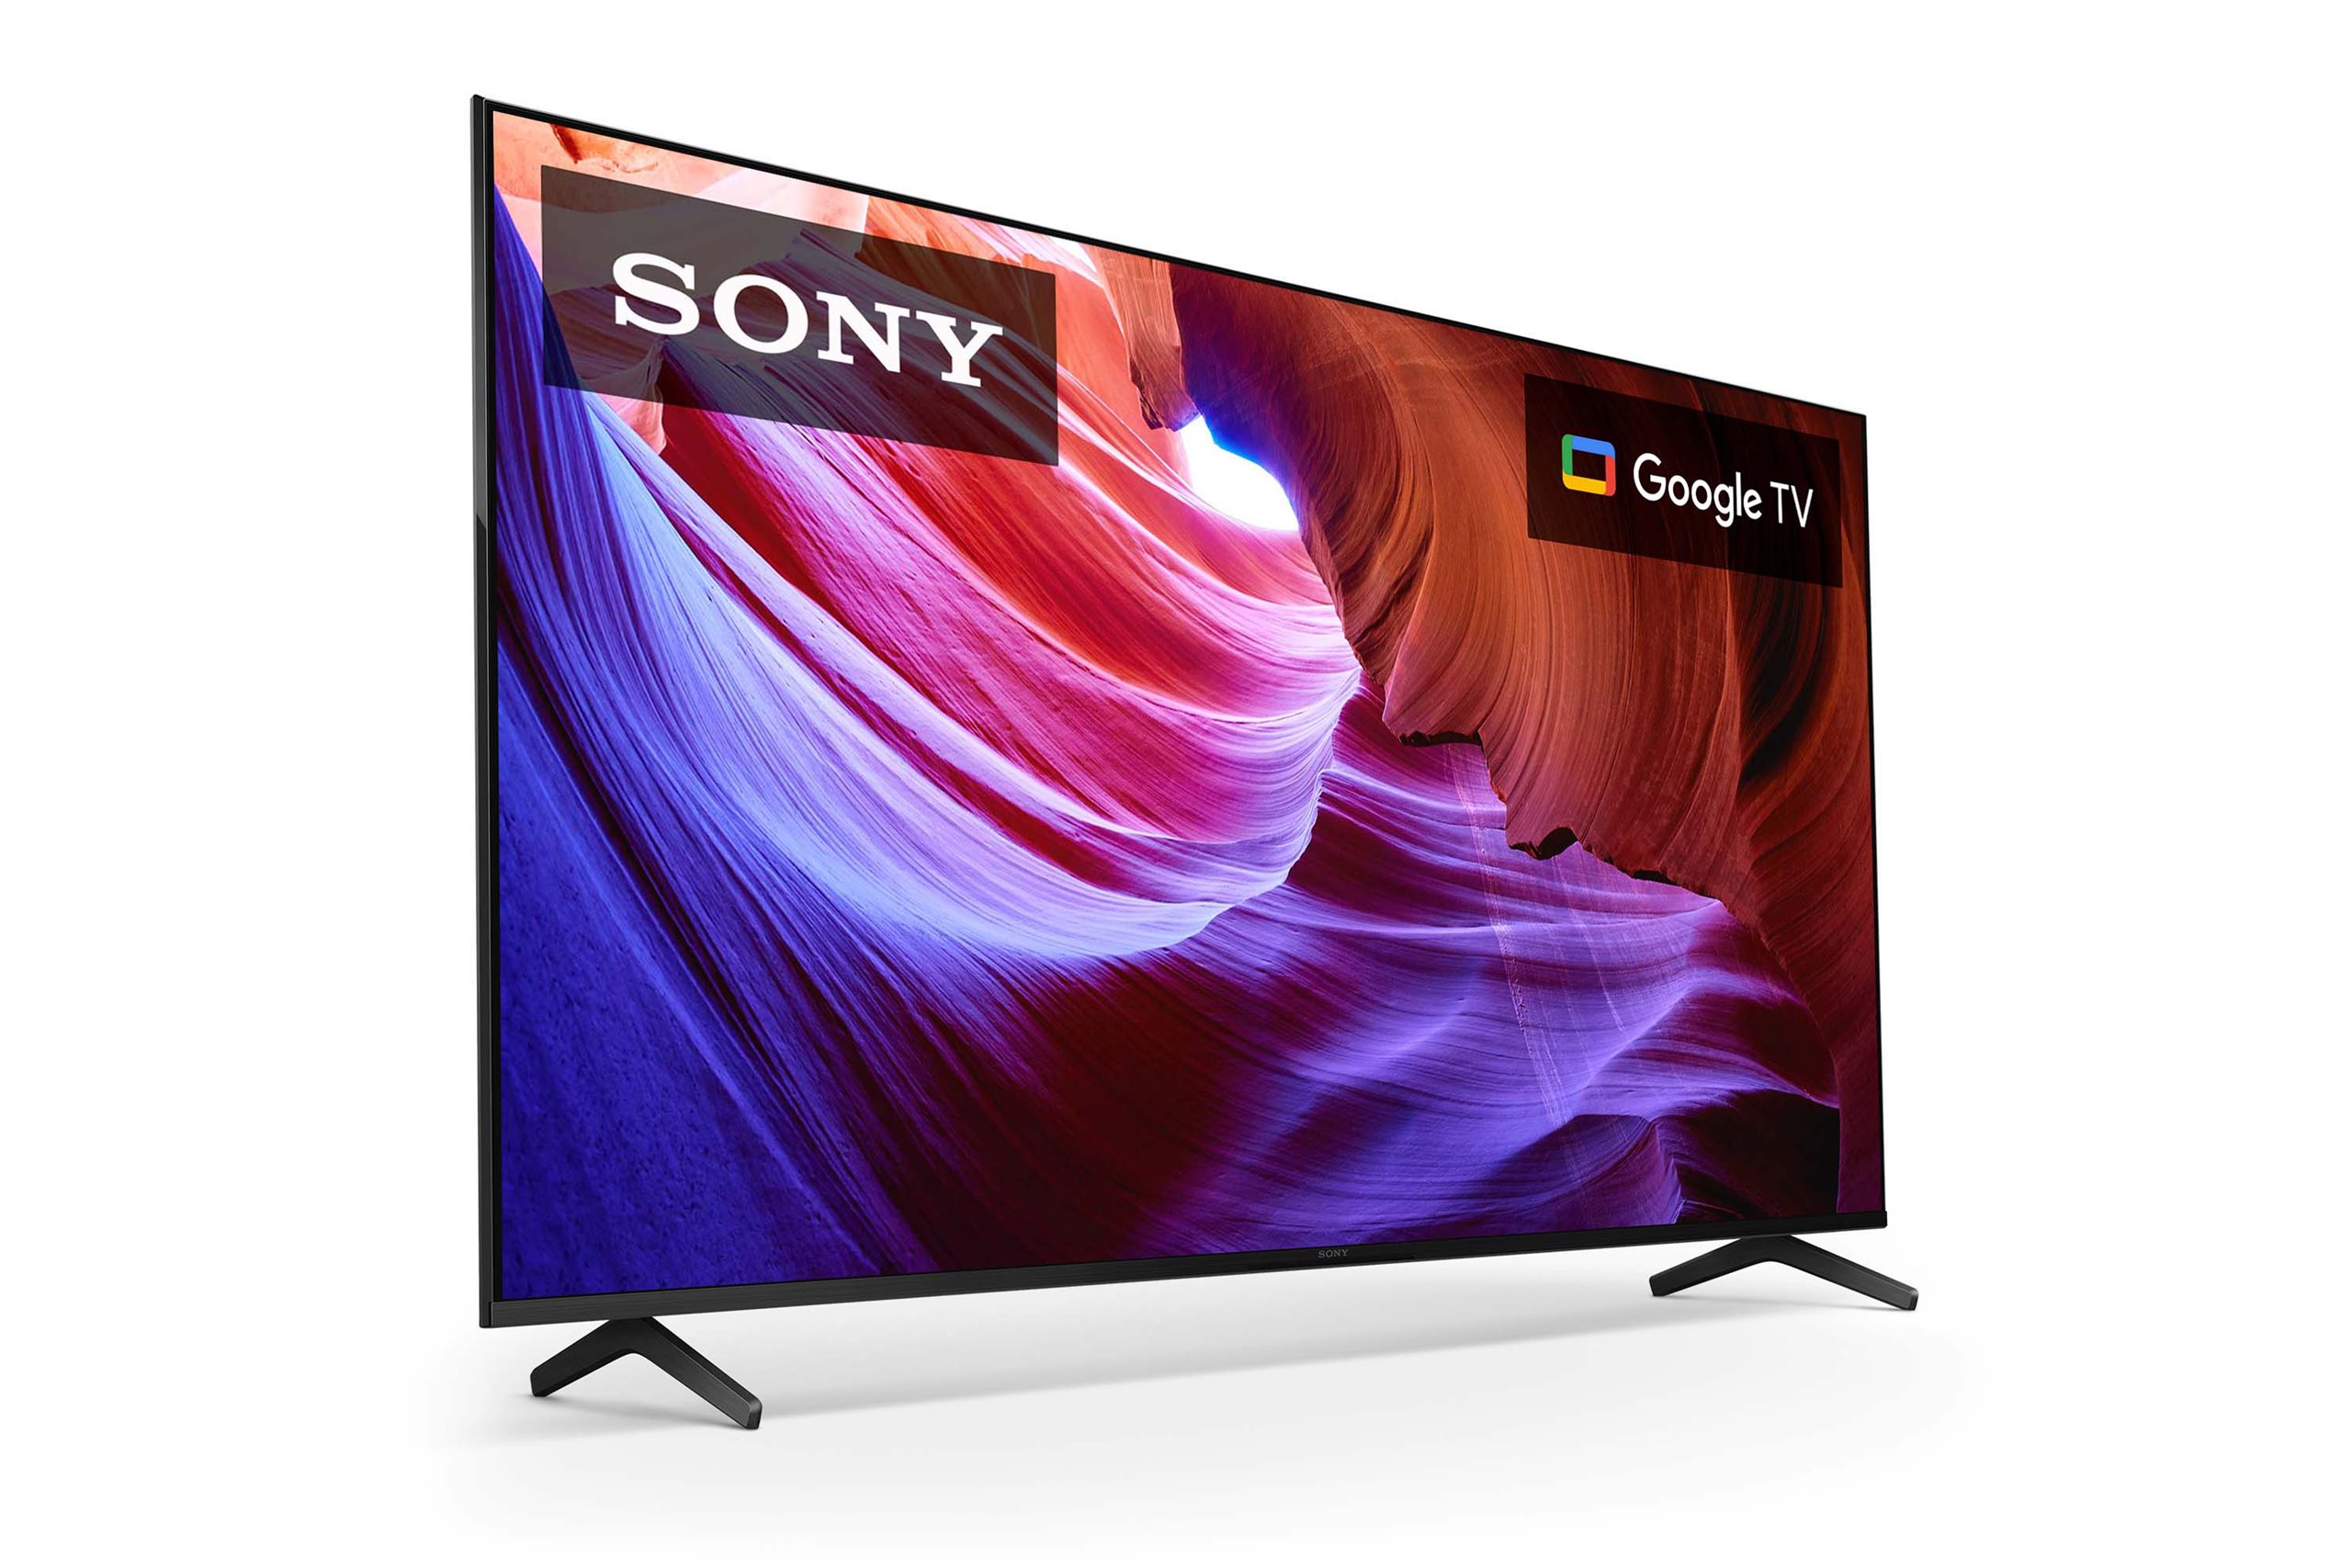 X85K Ultra 55” Google Sony Class KD55X85K- 2022 HD TV LED 4K Model Smart with